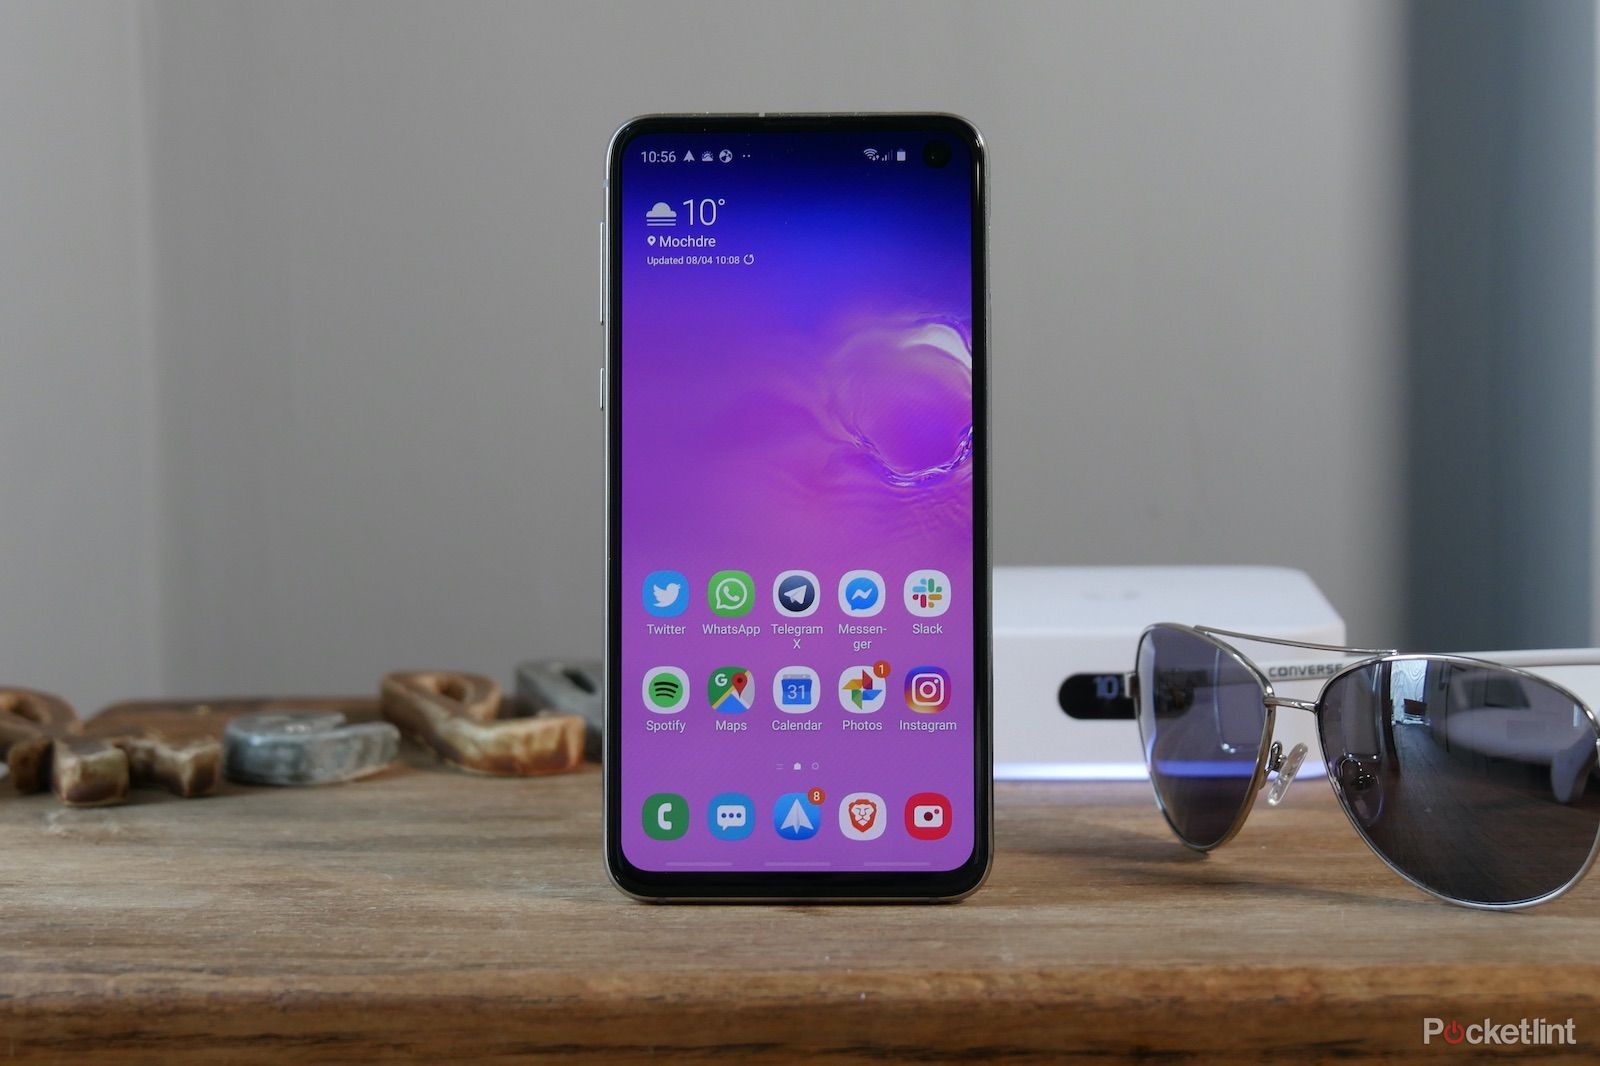 Samsung Galaxy S10e review: The best Galaxy S10 for most people